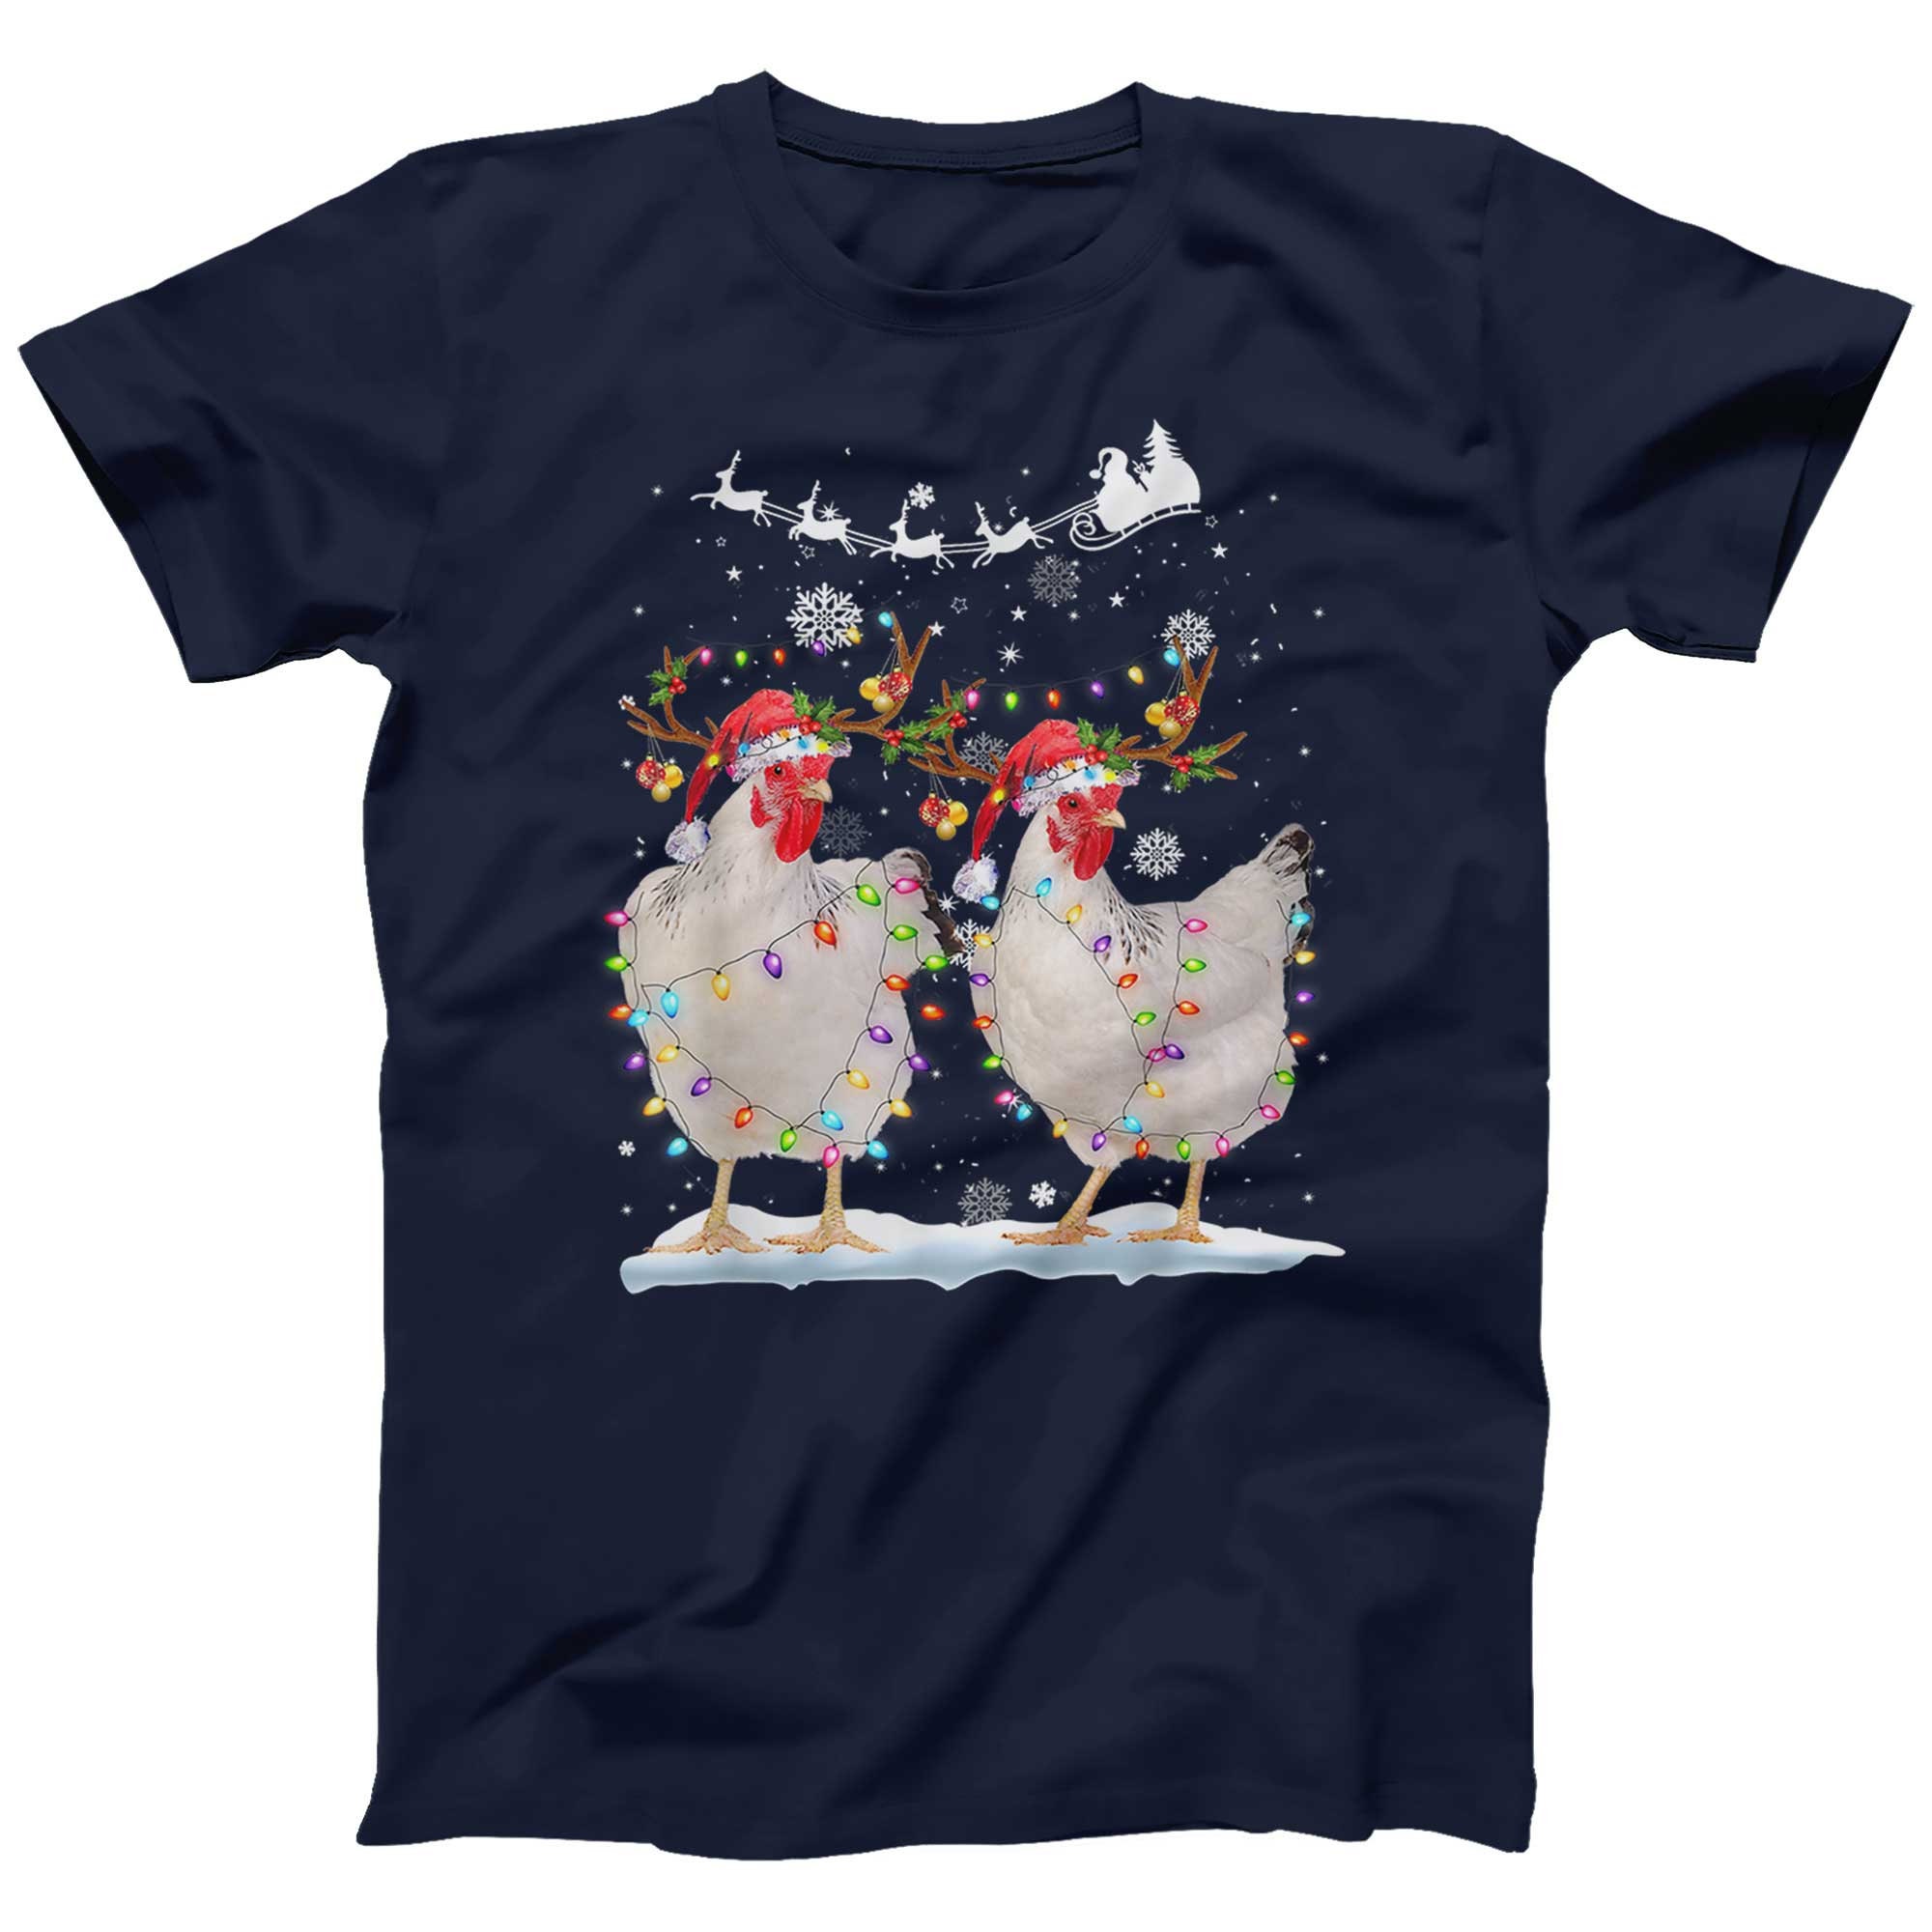 Discover Funny Chickens Christmas T-shirt for Men Ladies Kids Printed Poultry Xmas Gift Tee | Plus size available